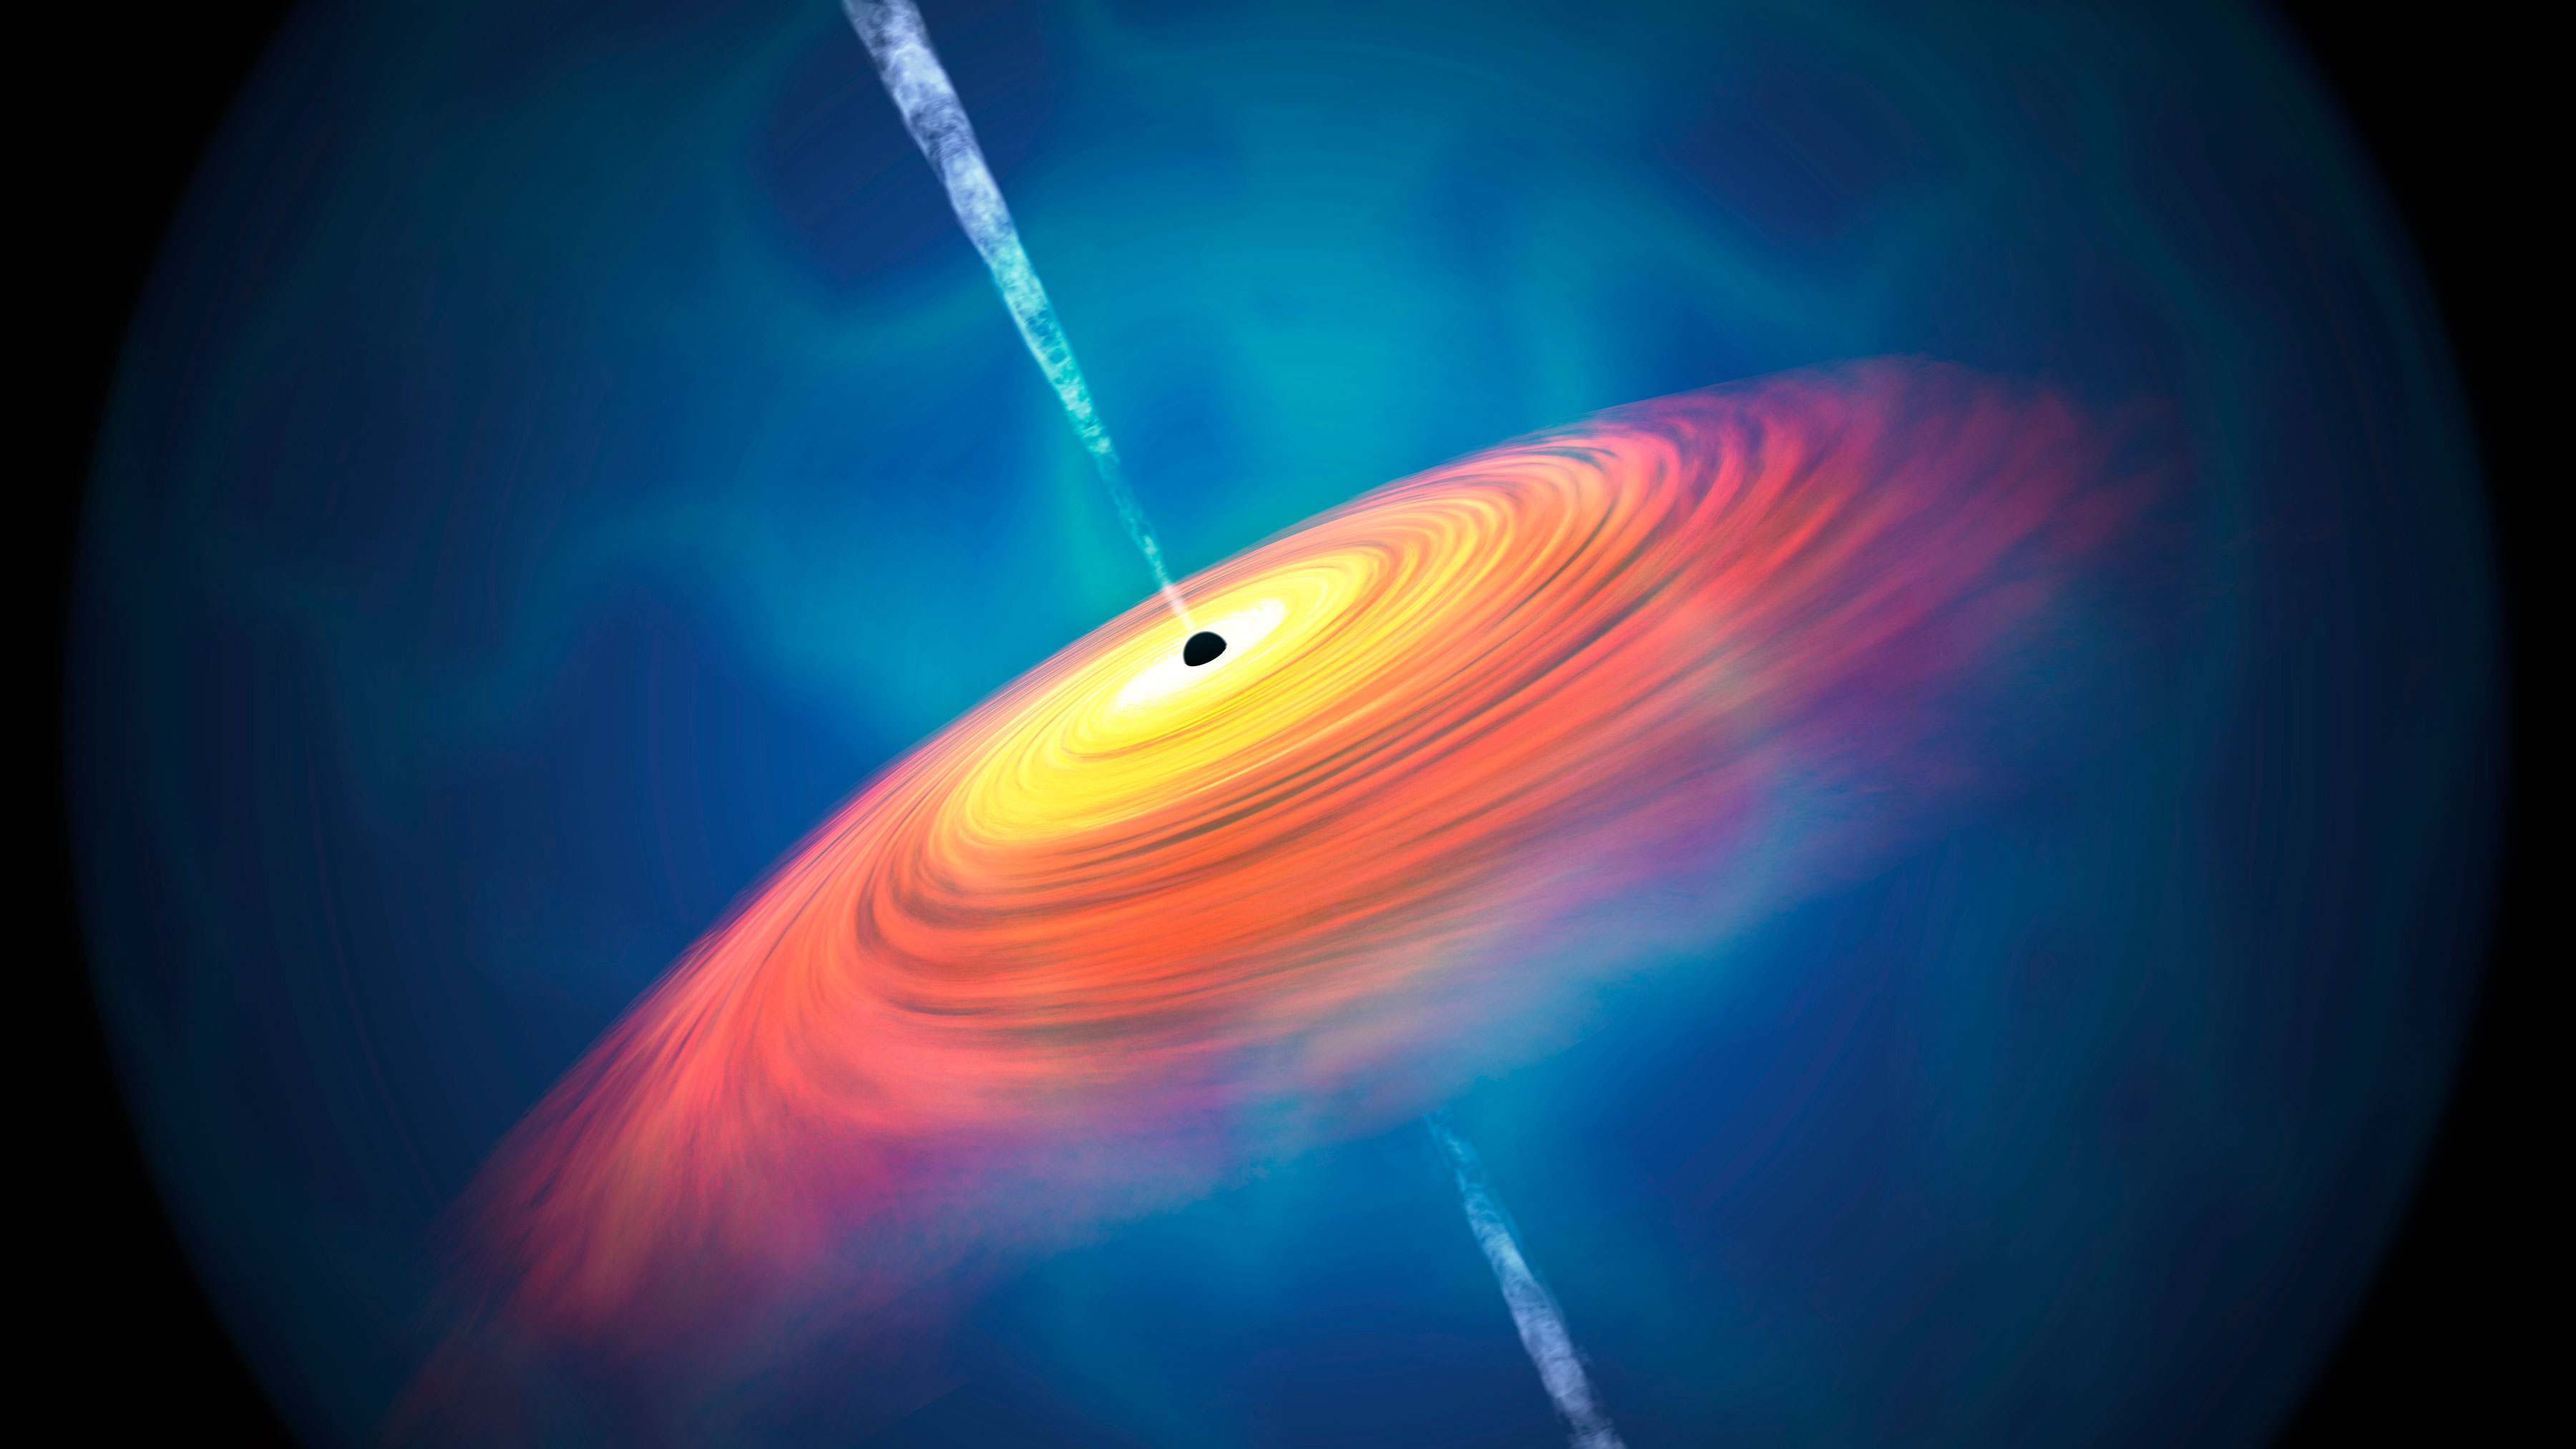 Astronomers discover 83 supermassive black holes in the early universe image